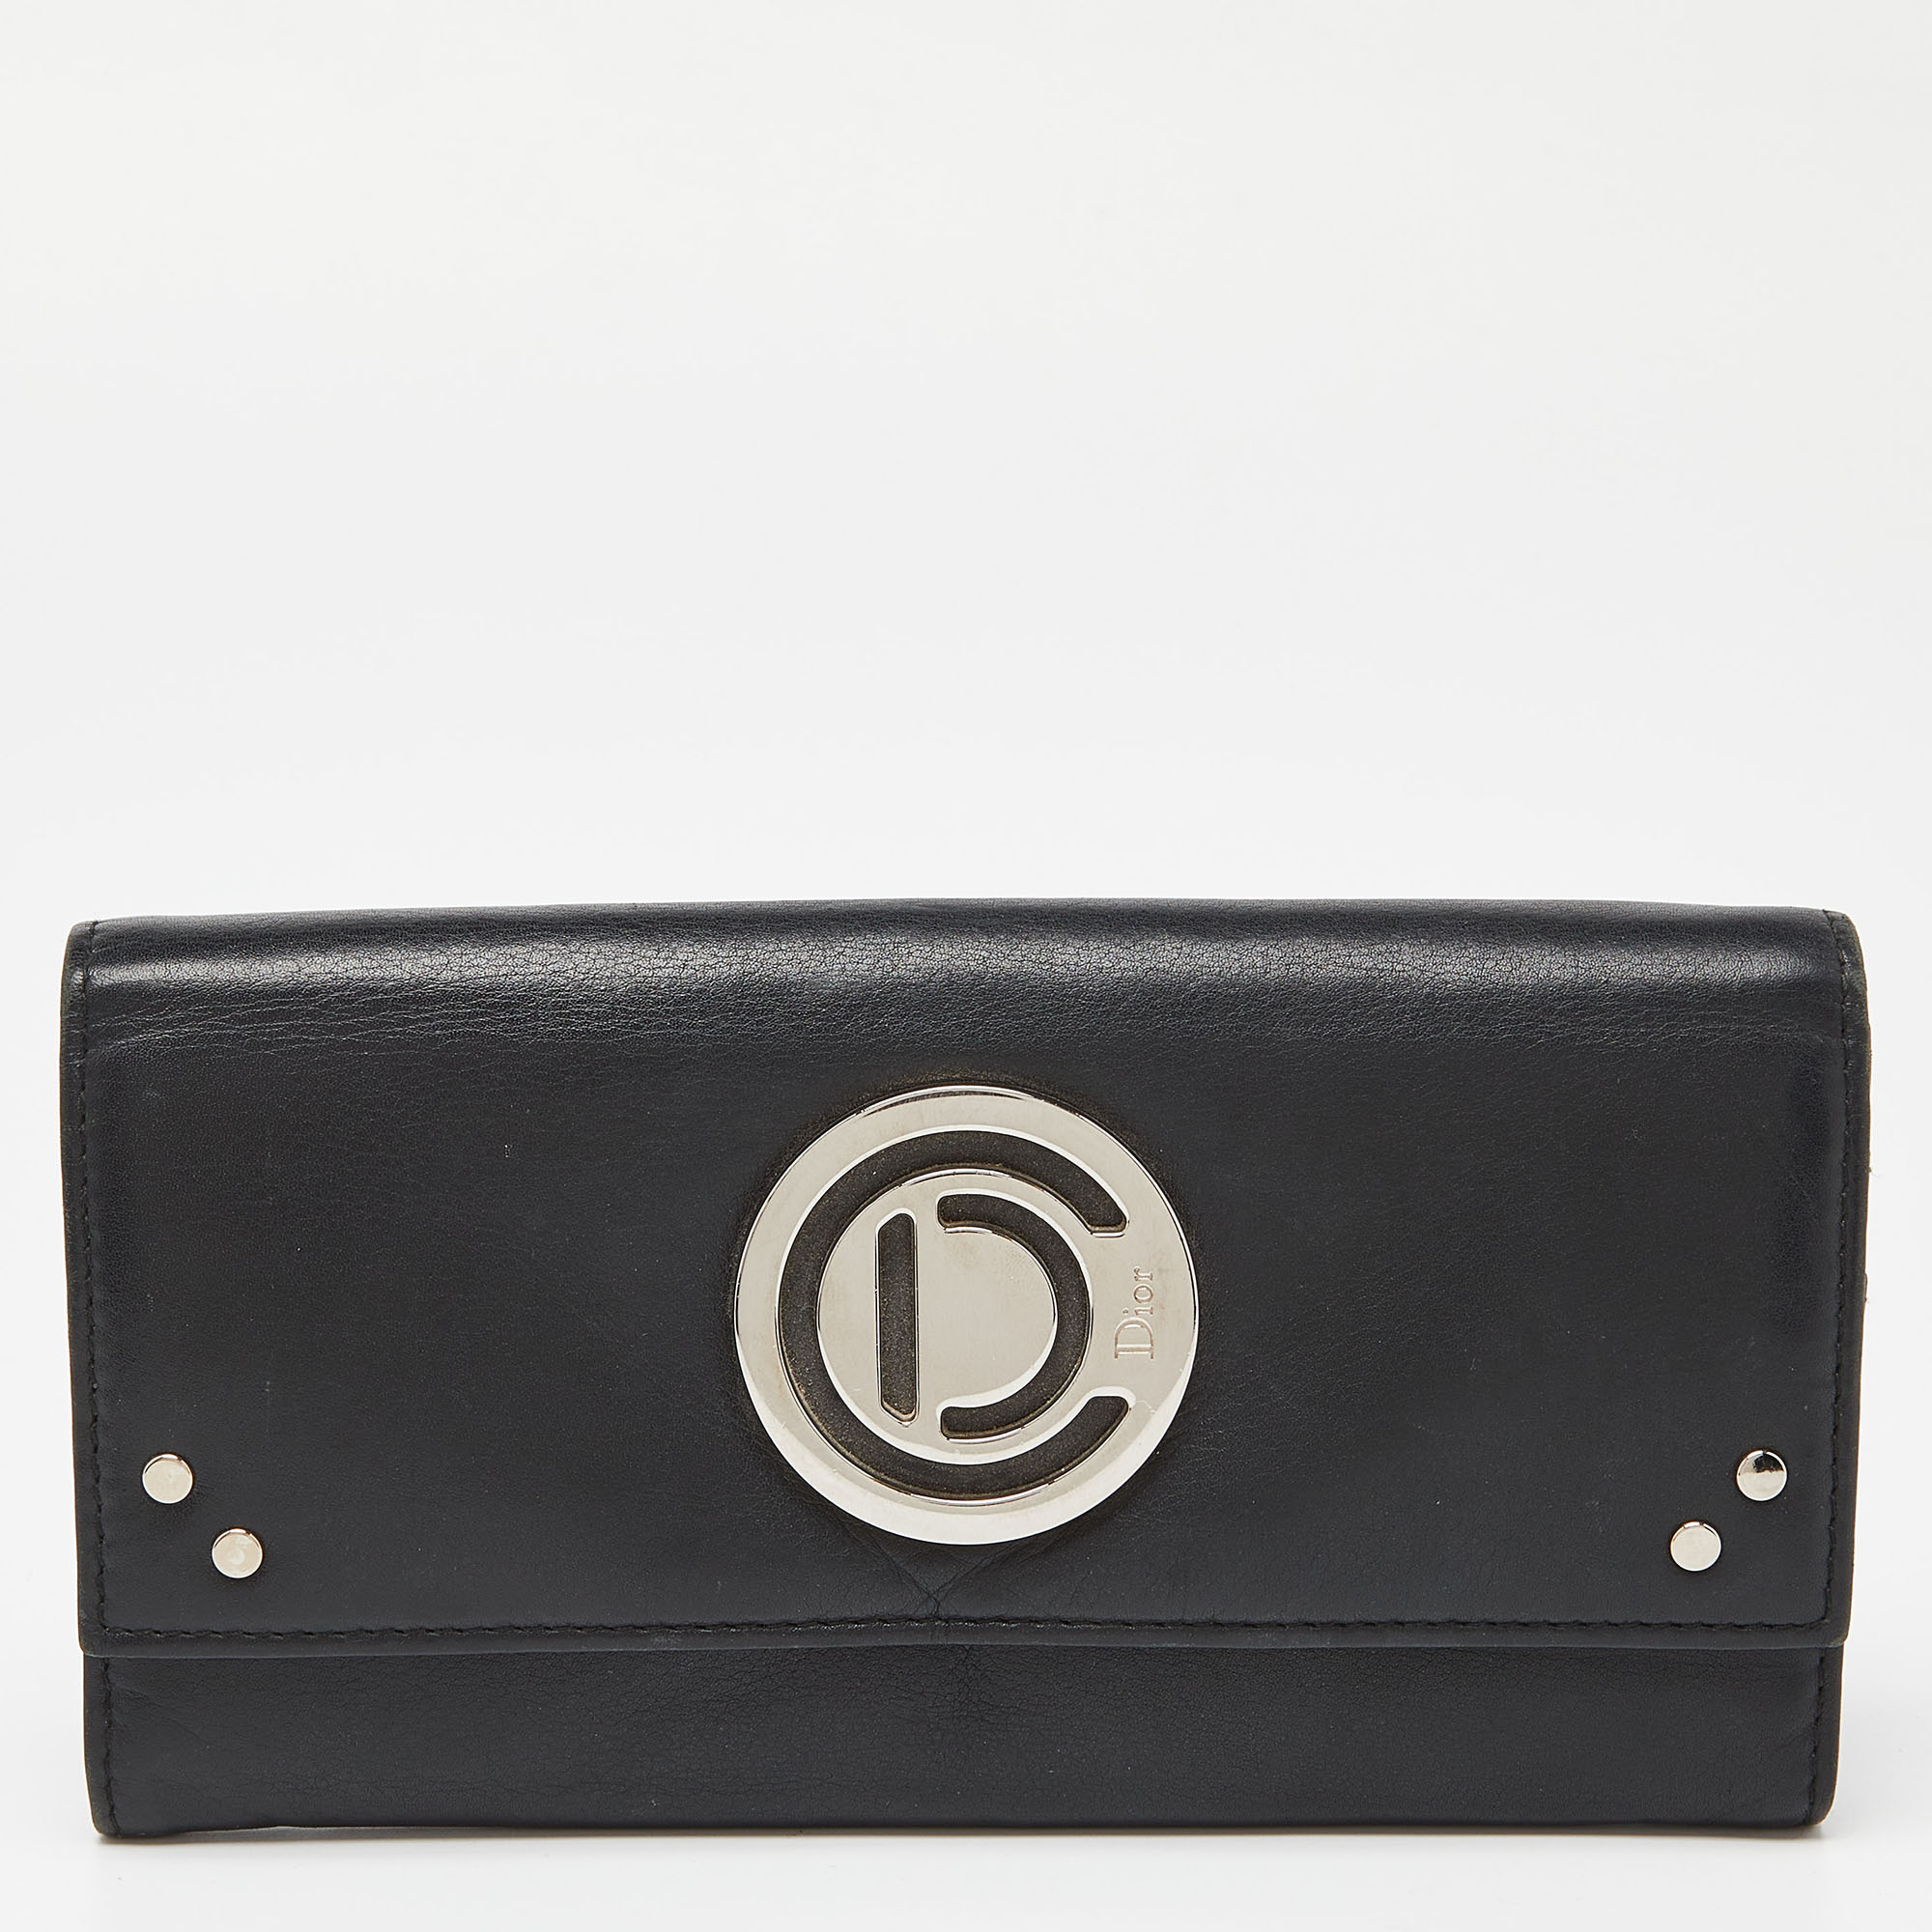 Dior black leather flap continental wallet